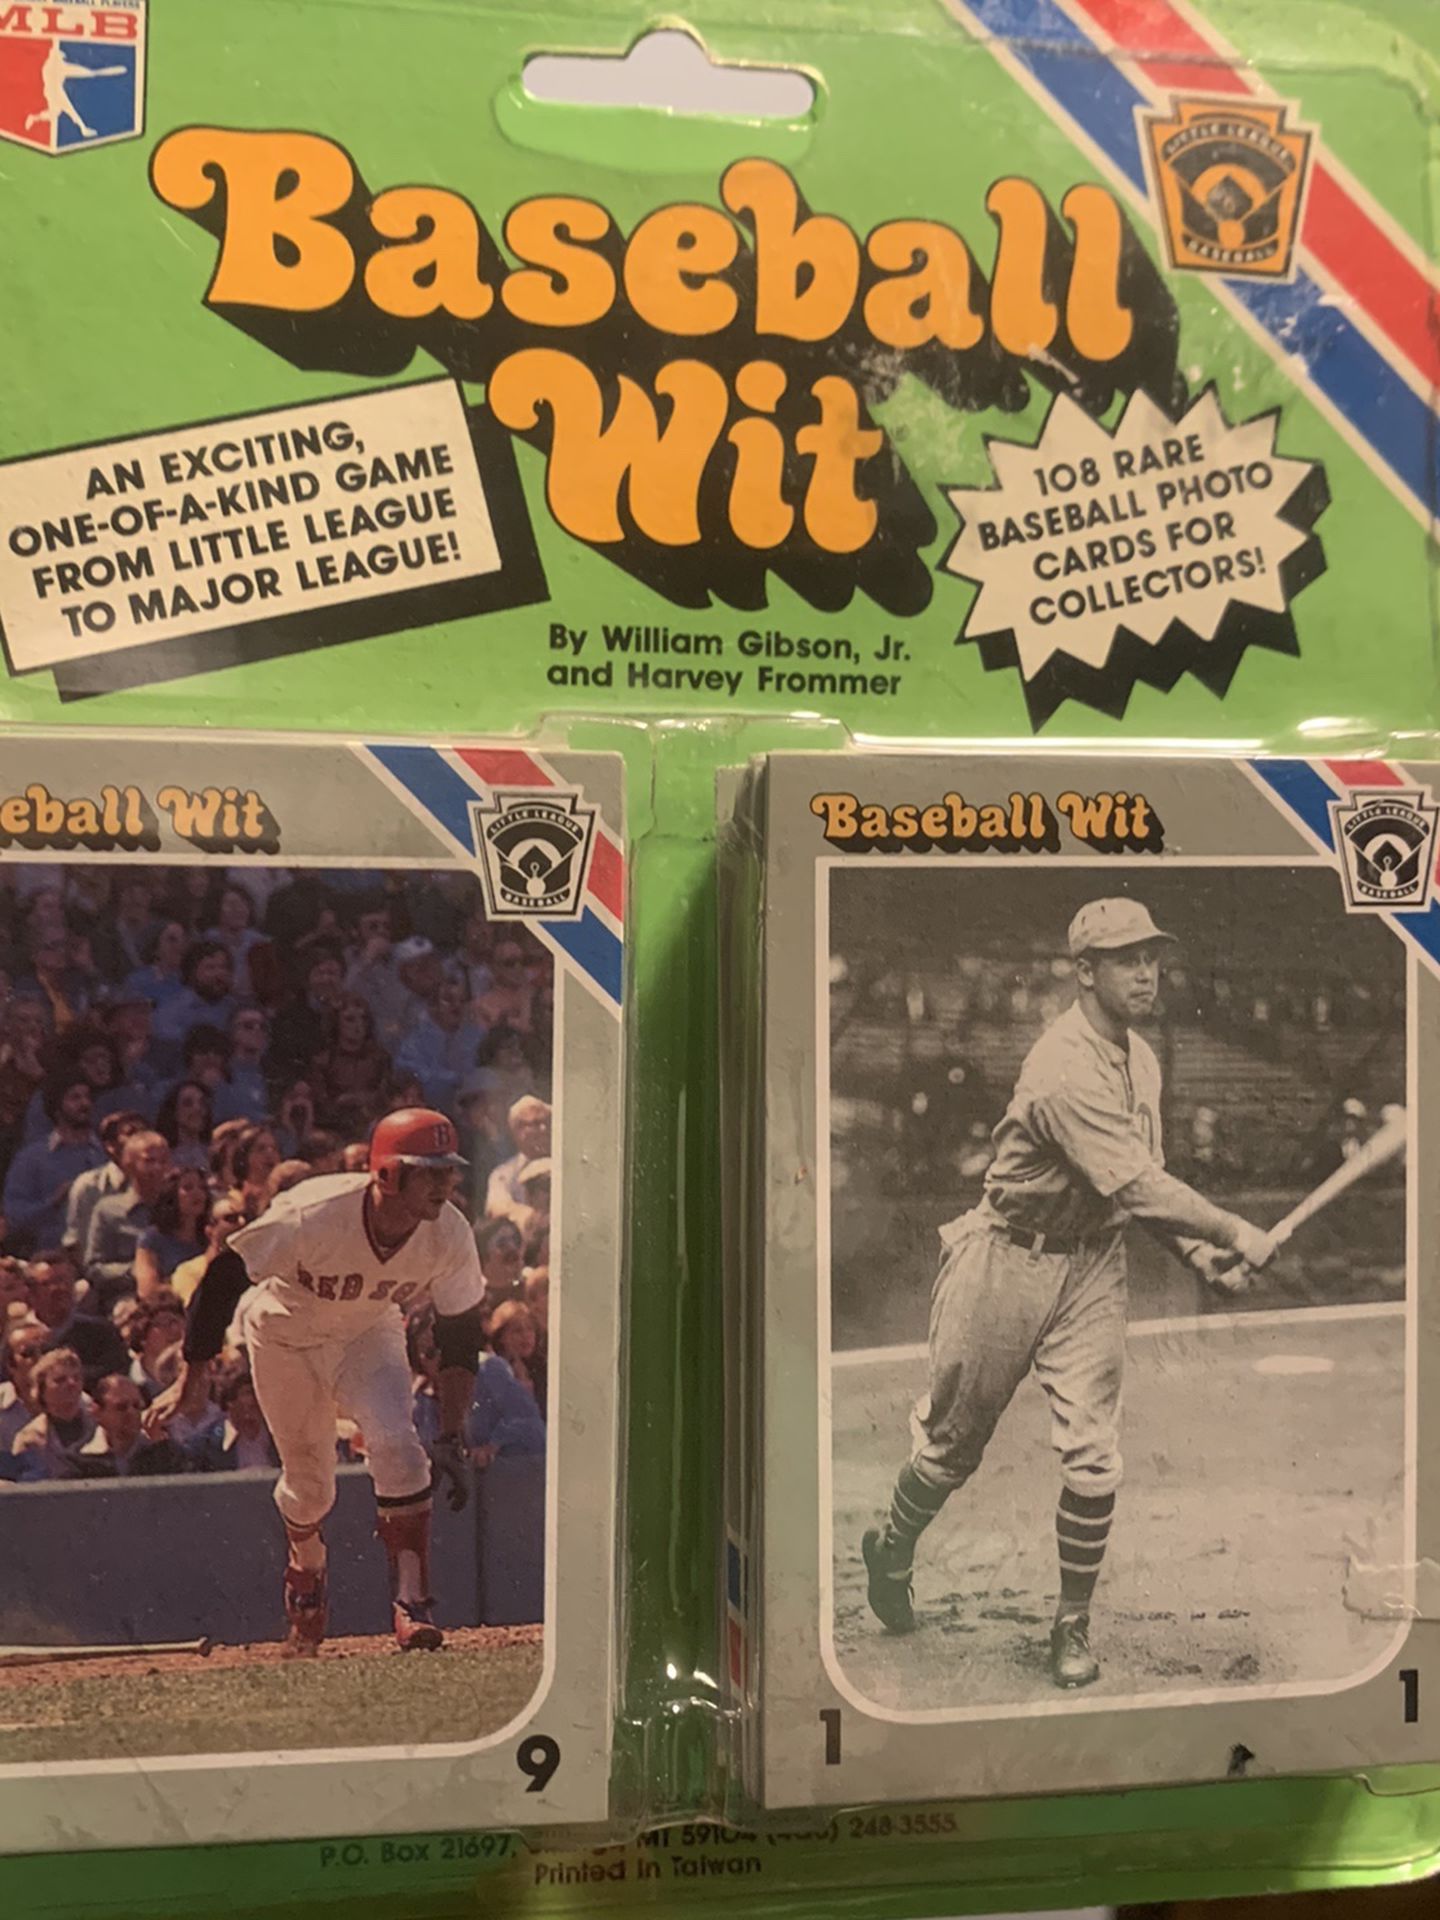 Baseball wit Collectors card game